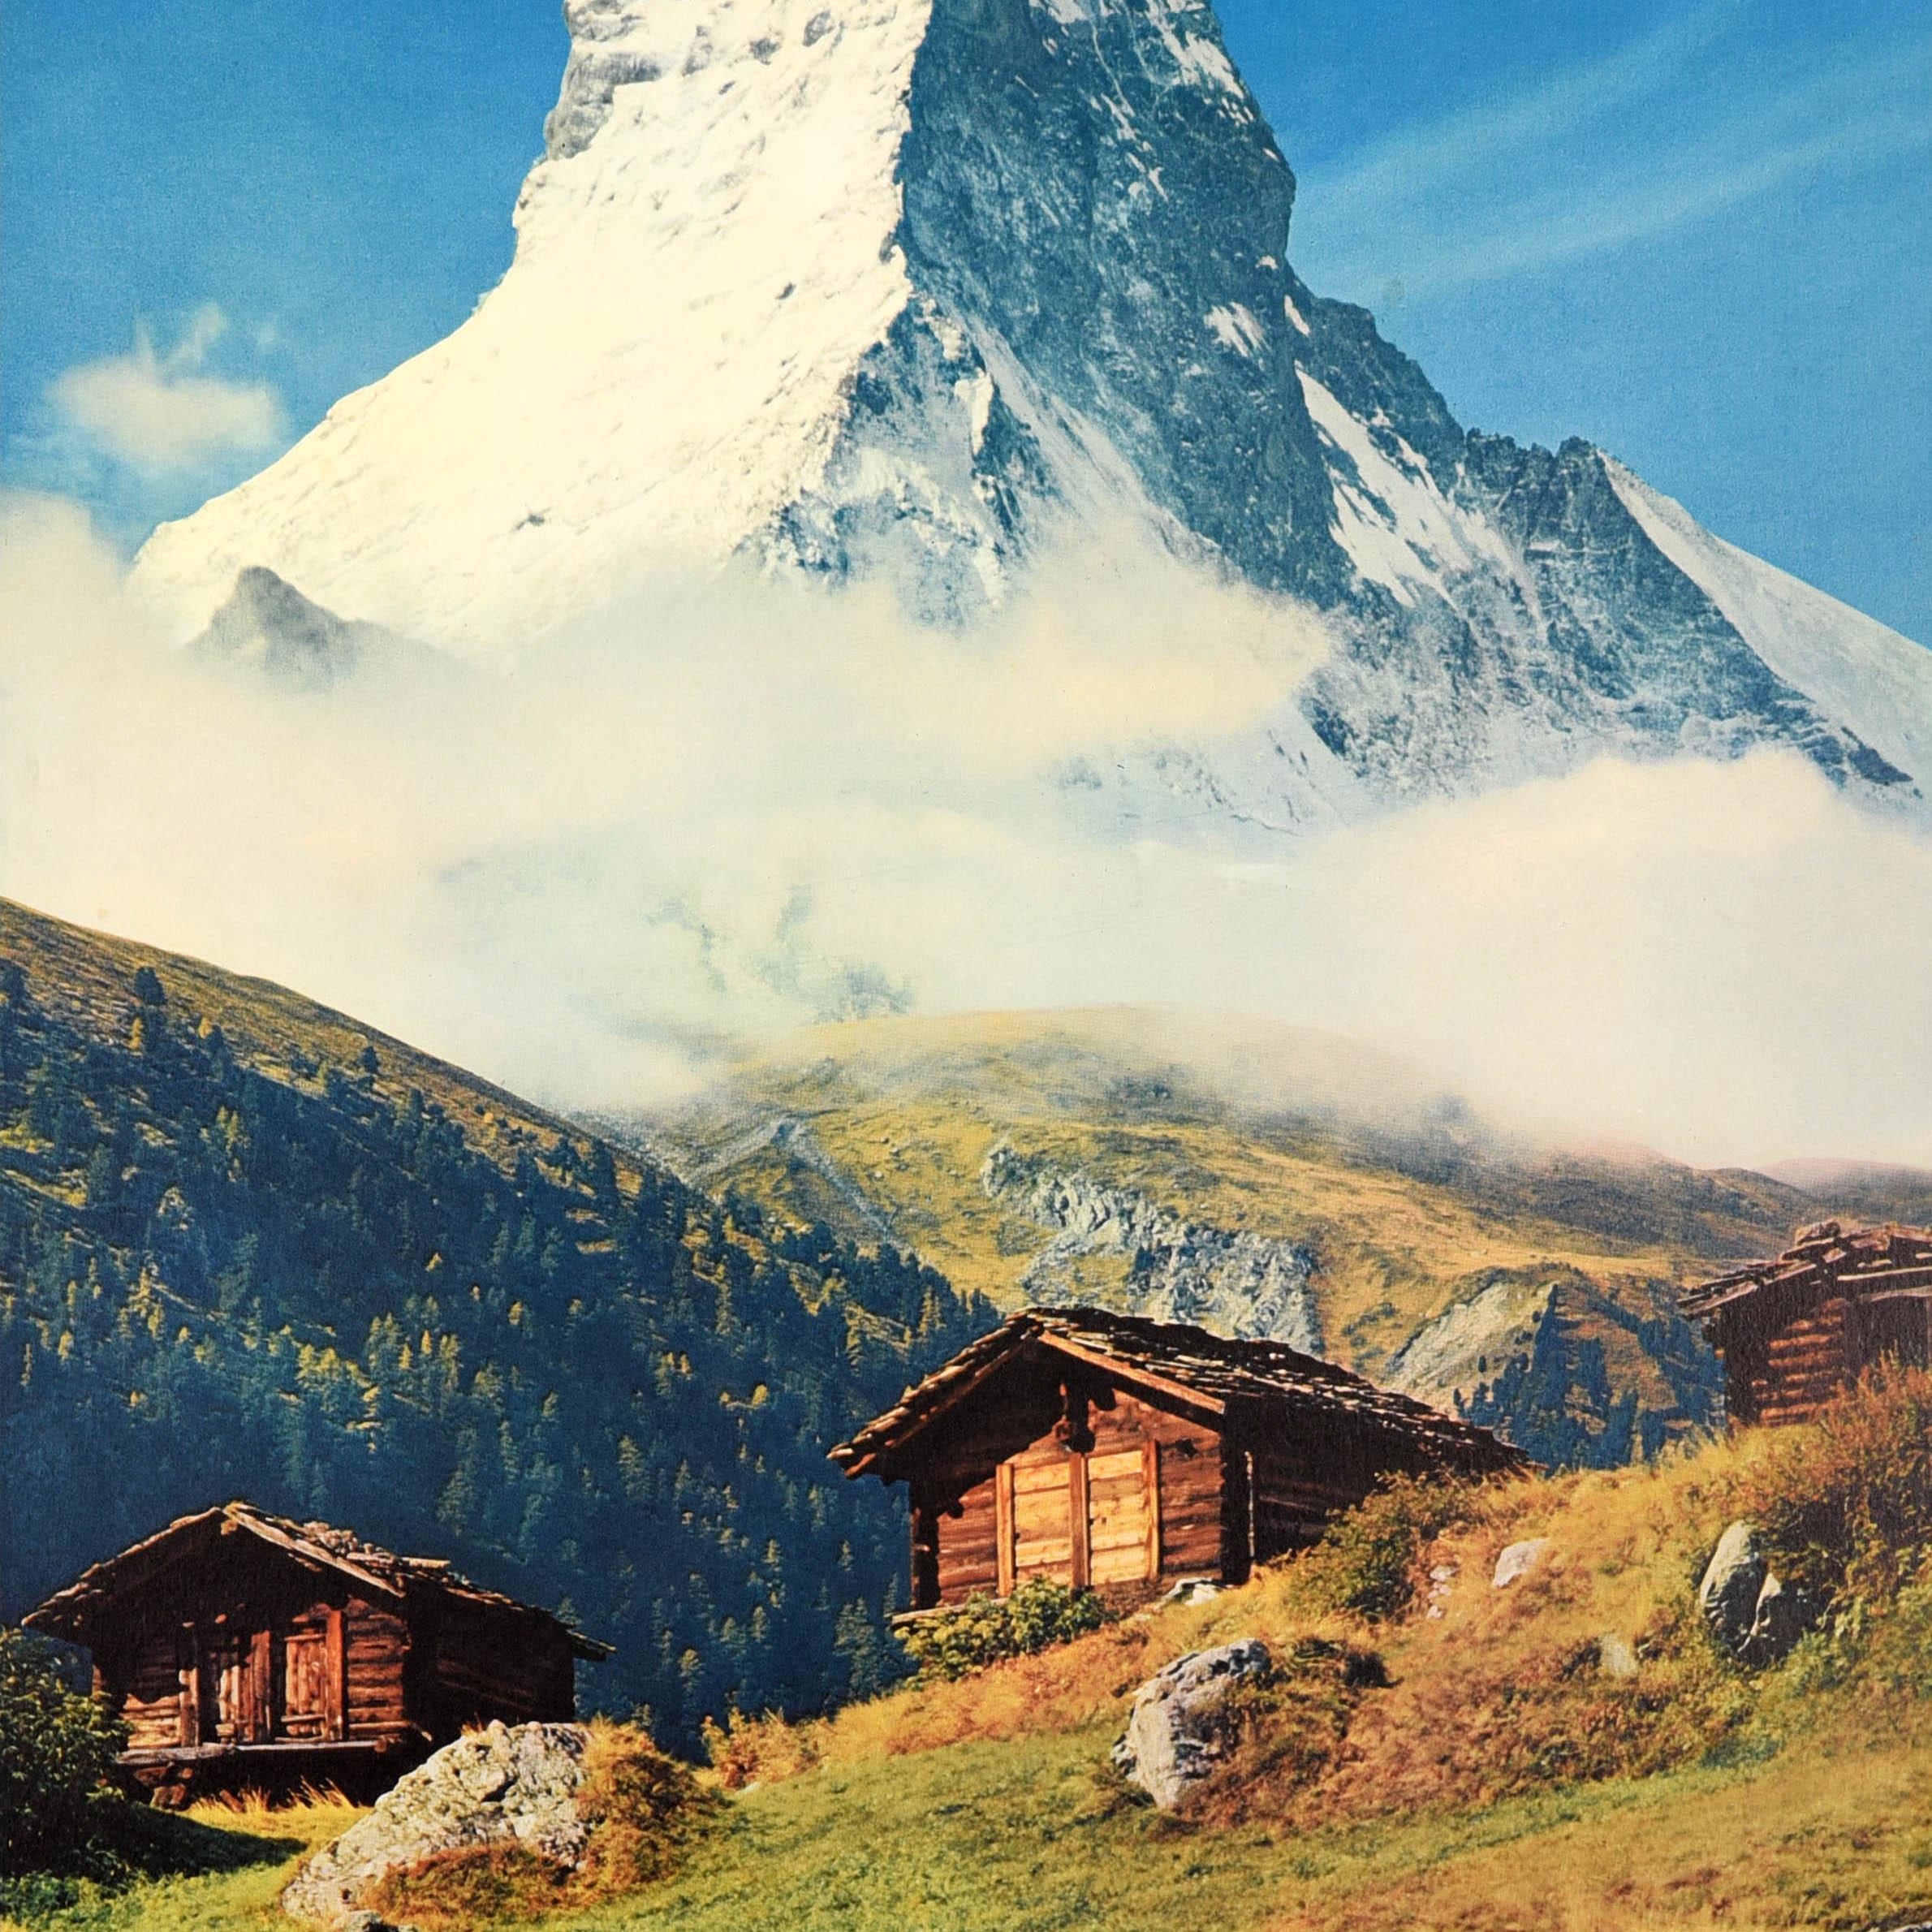 Original vintage travel poster for Zermatt Schweiz Suisse Switzerland featuring a scenic view looking up towards the snow topped Matterhorn mountain (Cervin) through a thin layer of cloud with wooden chalets and rocks on a hillside field below.